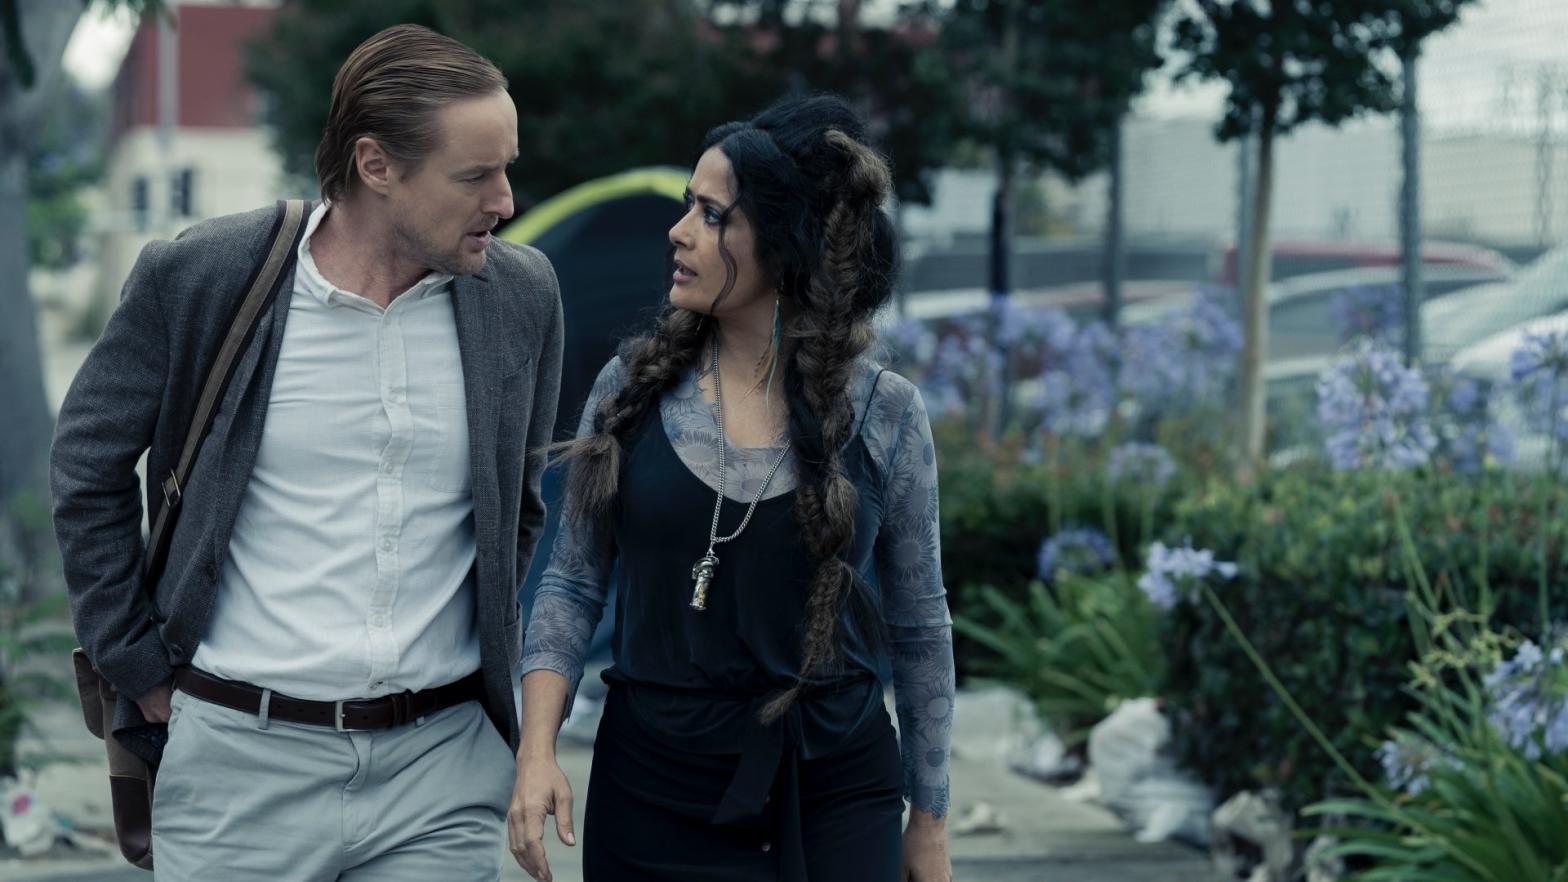 What's real (and what isn't) becomes increasingly unclear in Bliss, starring Owen Wilson and Salma Hayek. (Photo: Amazon)